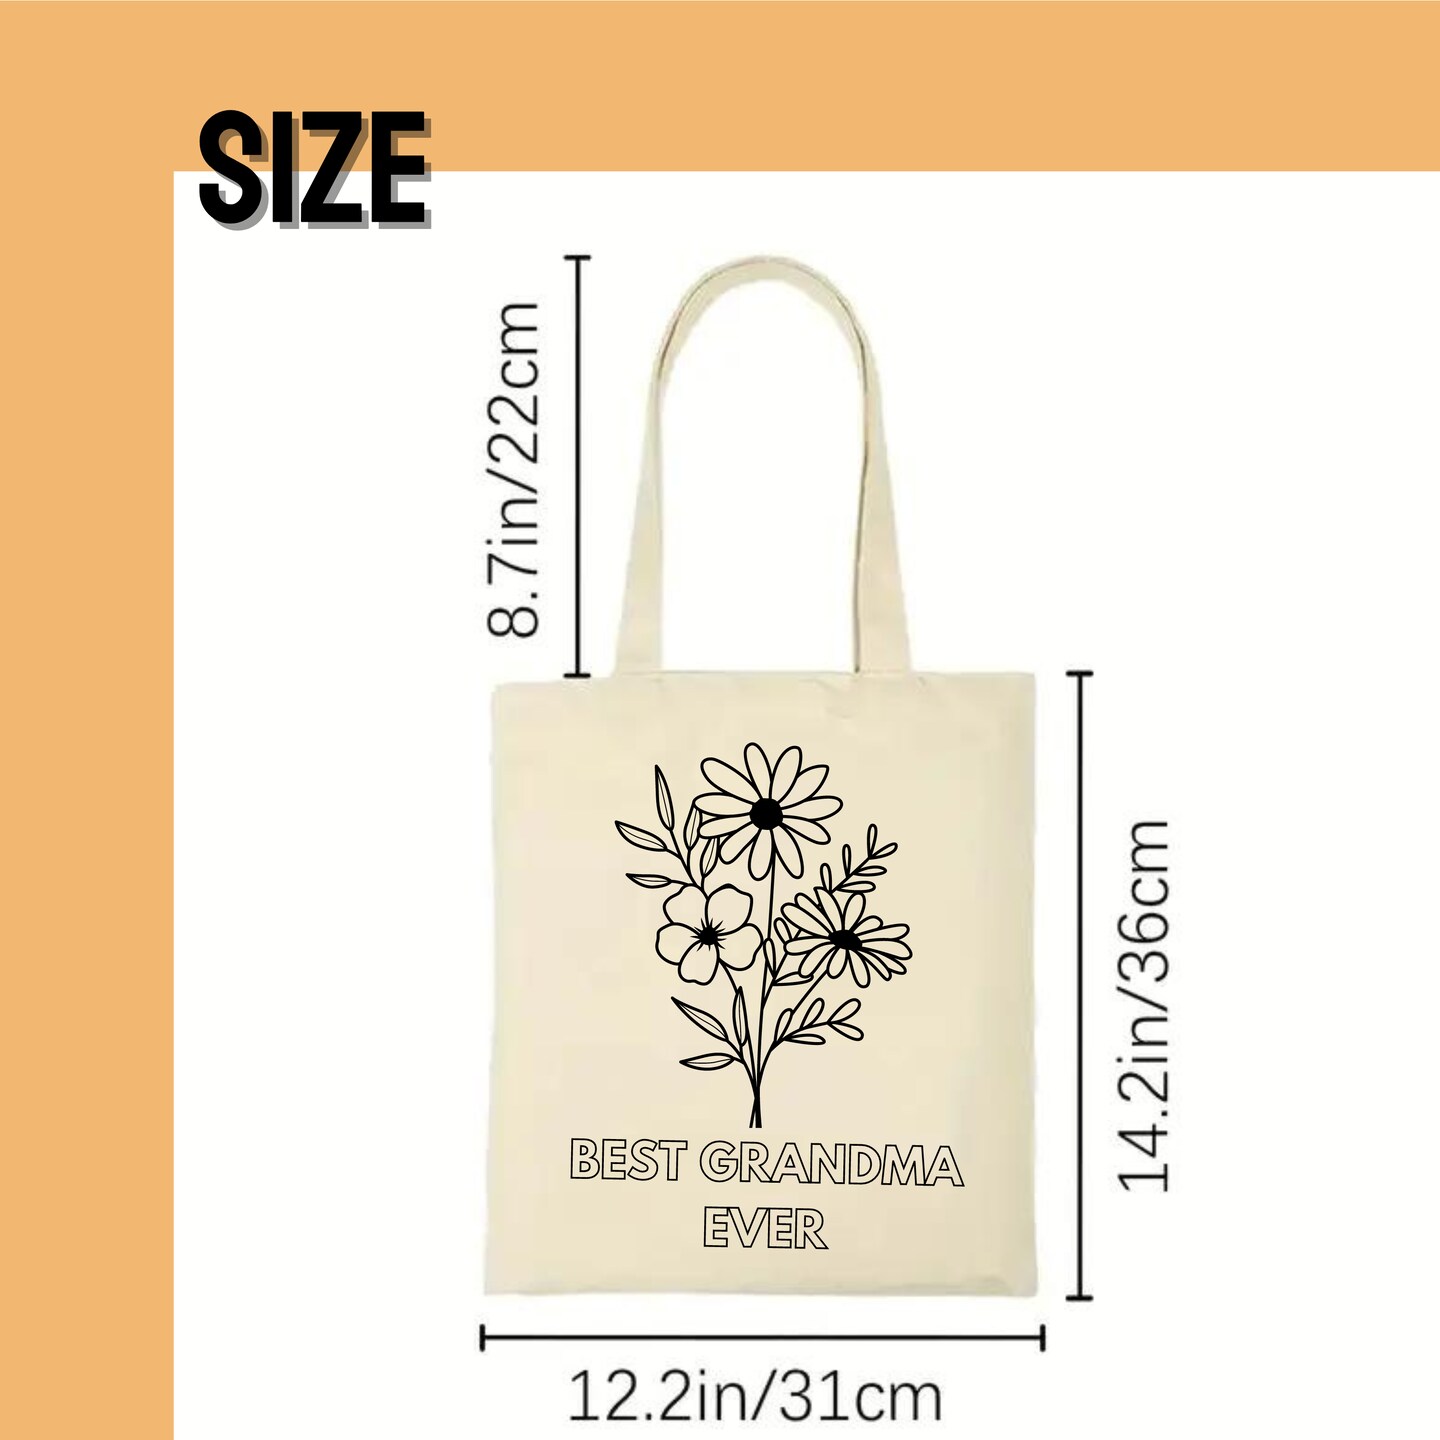 Coloring Flowers Tote Bag, Best Grandma Ever Tote Bag, Mother's Day Gift,  Color your own tote bag,